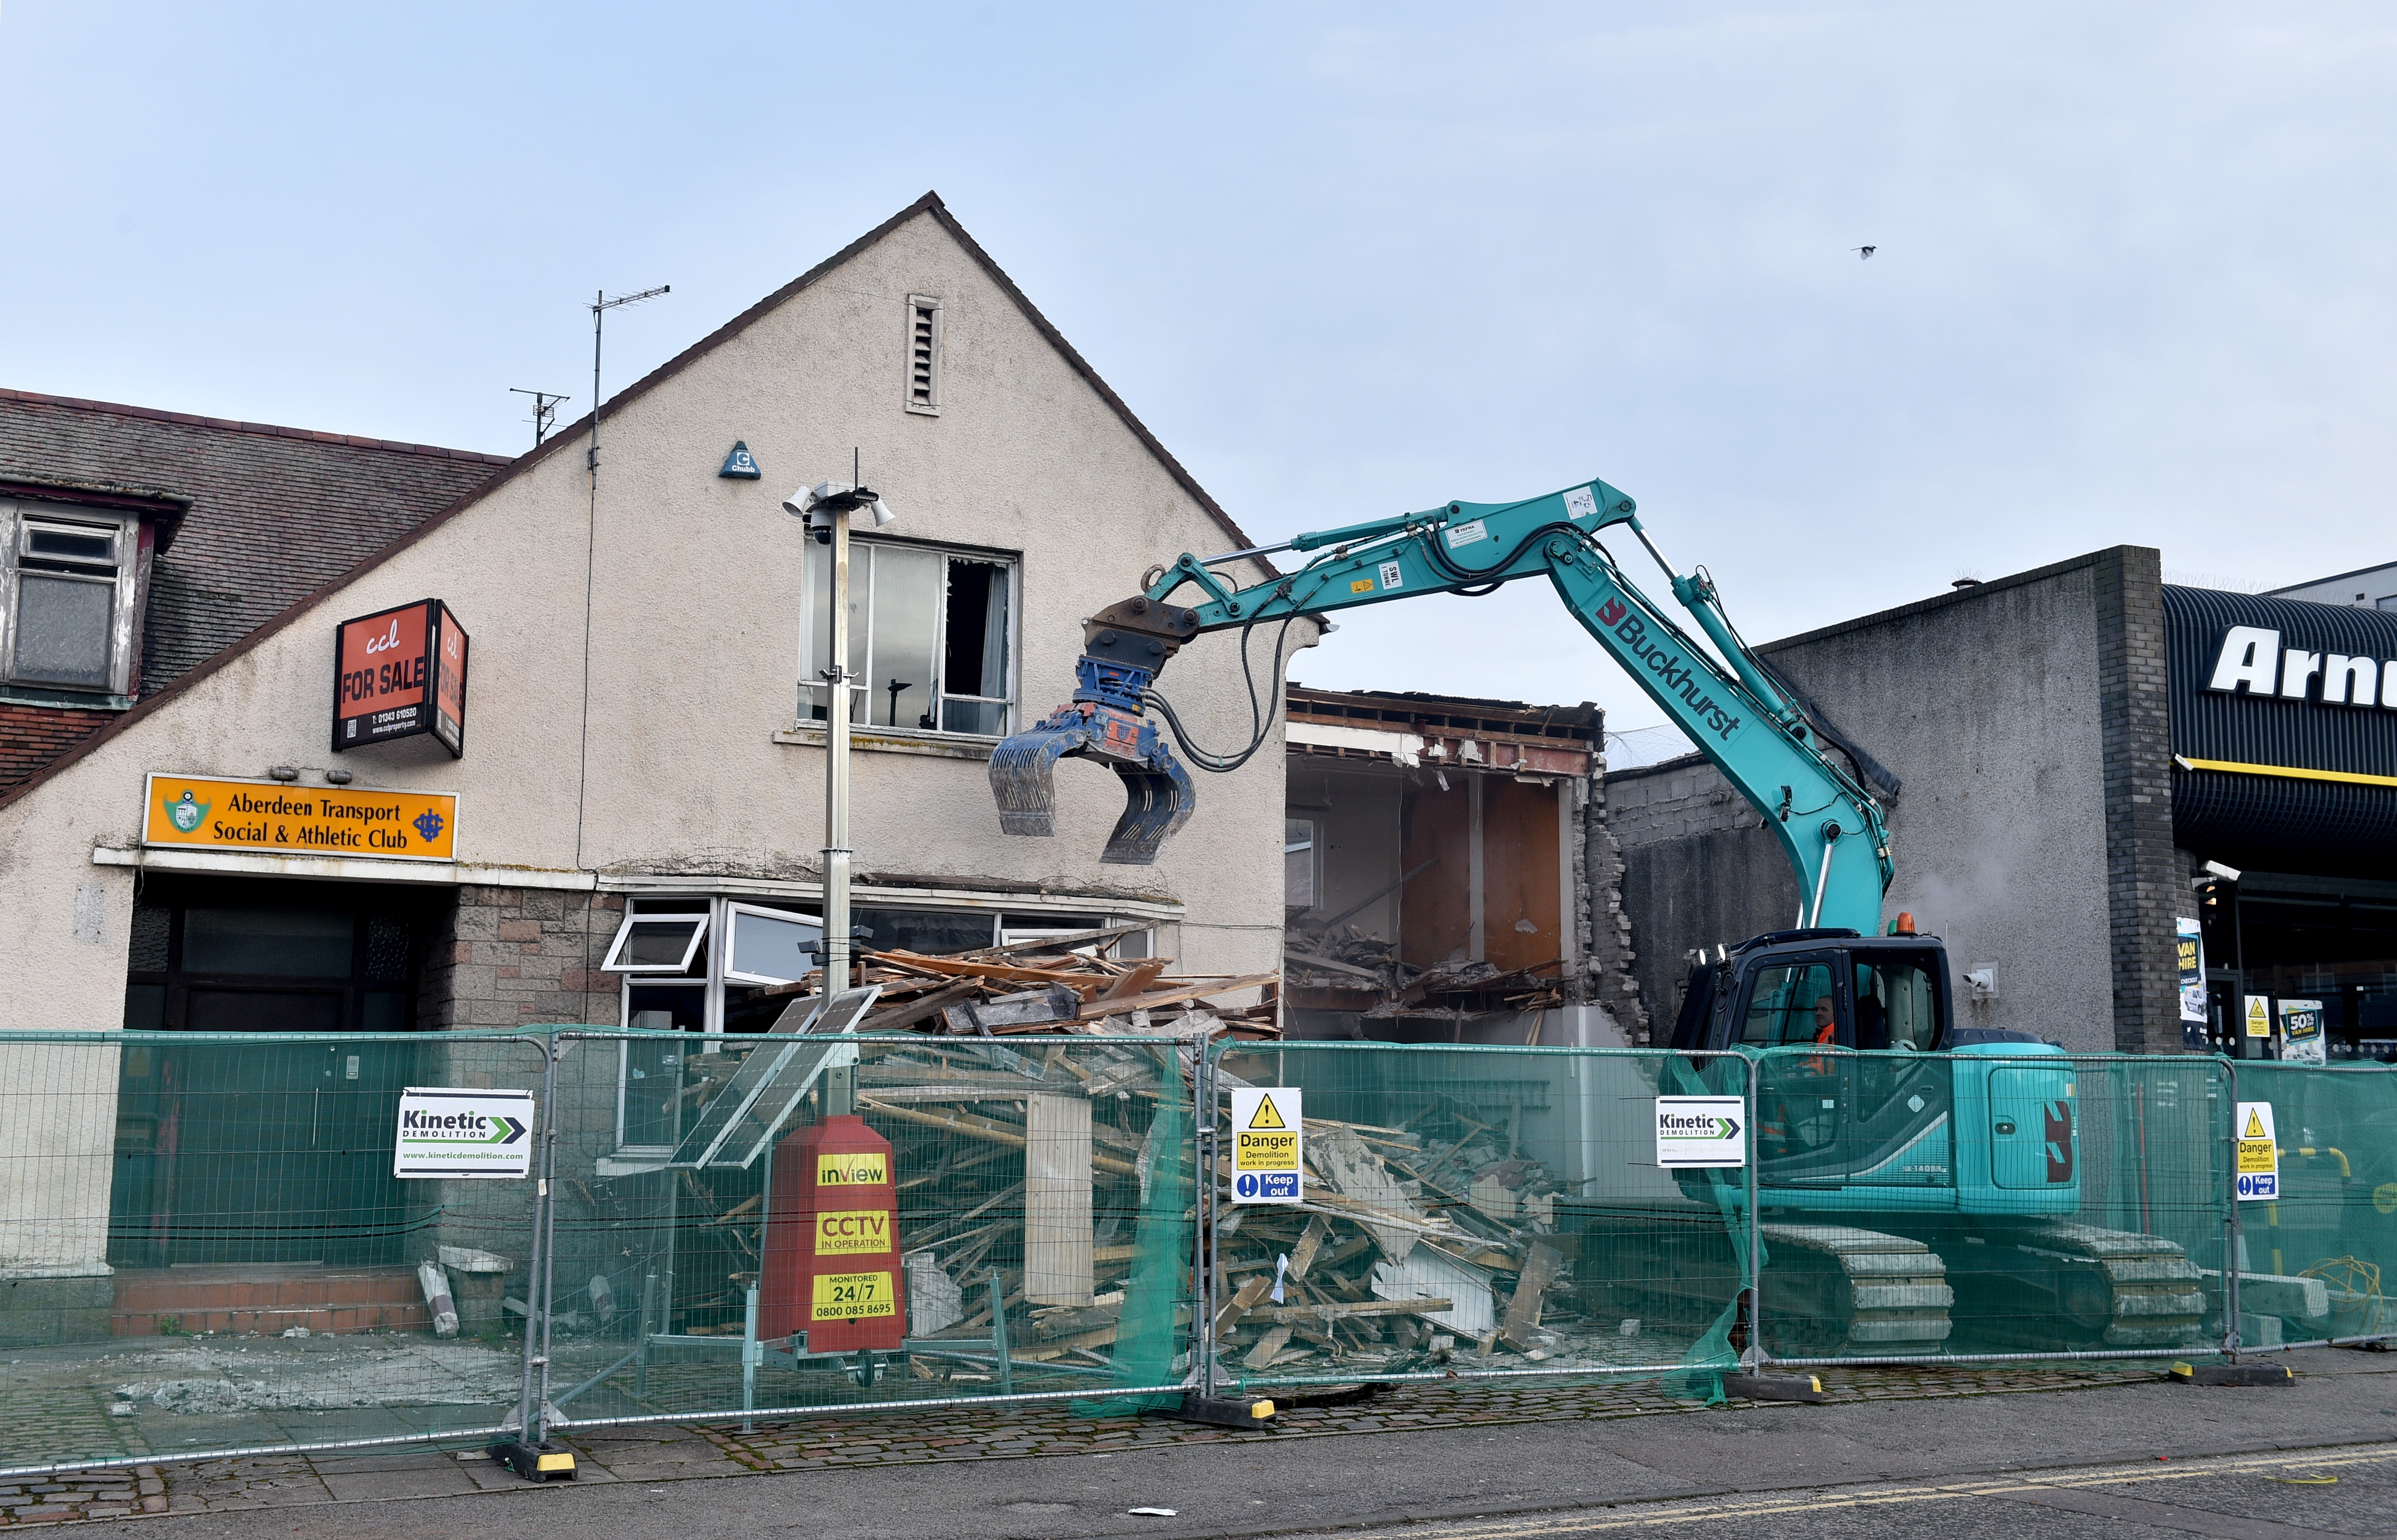 Pictured is the demolition of the Aberdeen Transport and Soclial Club, Canal Road, Aberdeen. Arnold Clark has already been granted a building warrant to demolish Aberdeen Transport Club in the citys Canal Road. But the motor group now has lodged a planning application to build a car park, wash bay and fuelling station on the site, which is next door to its car and rental business.
Picture by DARRELL BENNS 
Pictured on 09/01/2020   
CR0018219